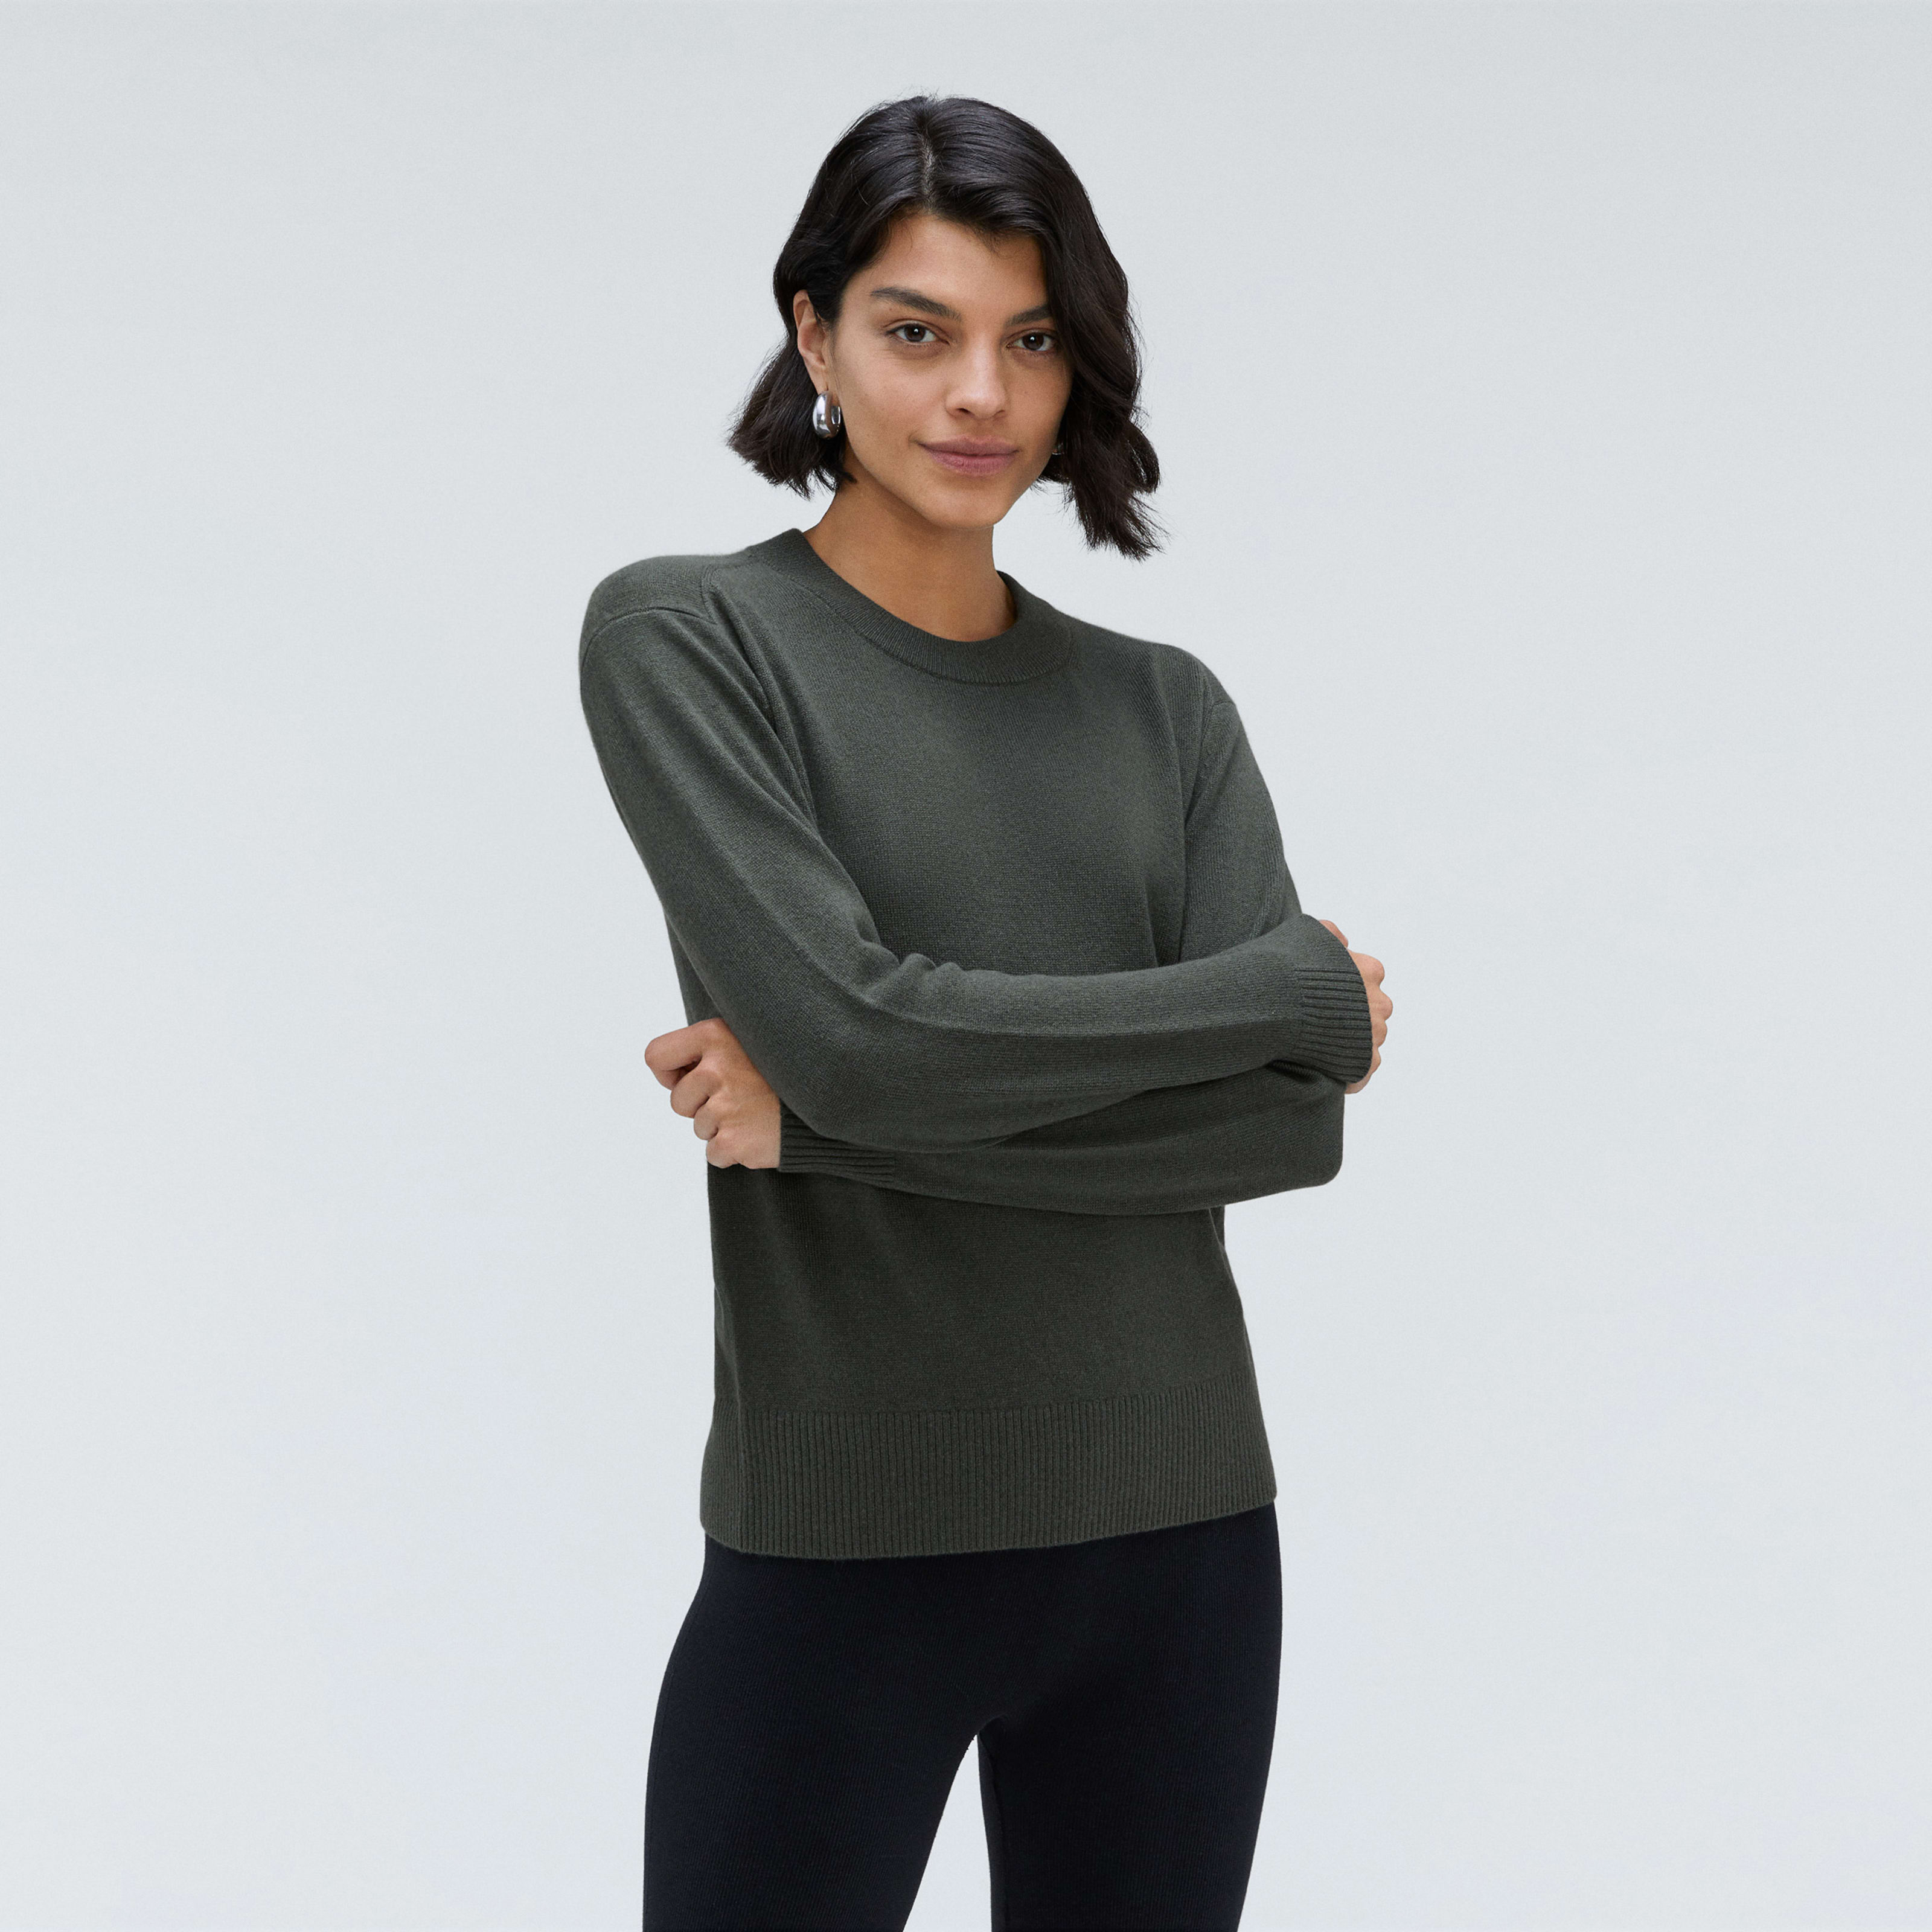 Women's Cashmere Crew Sweater by Everlane in Olive, Size XXS